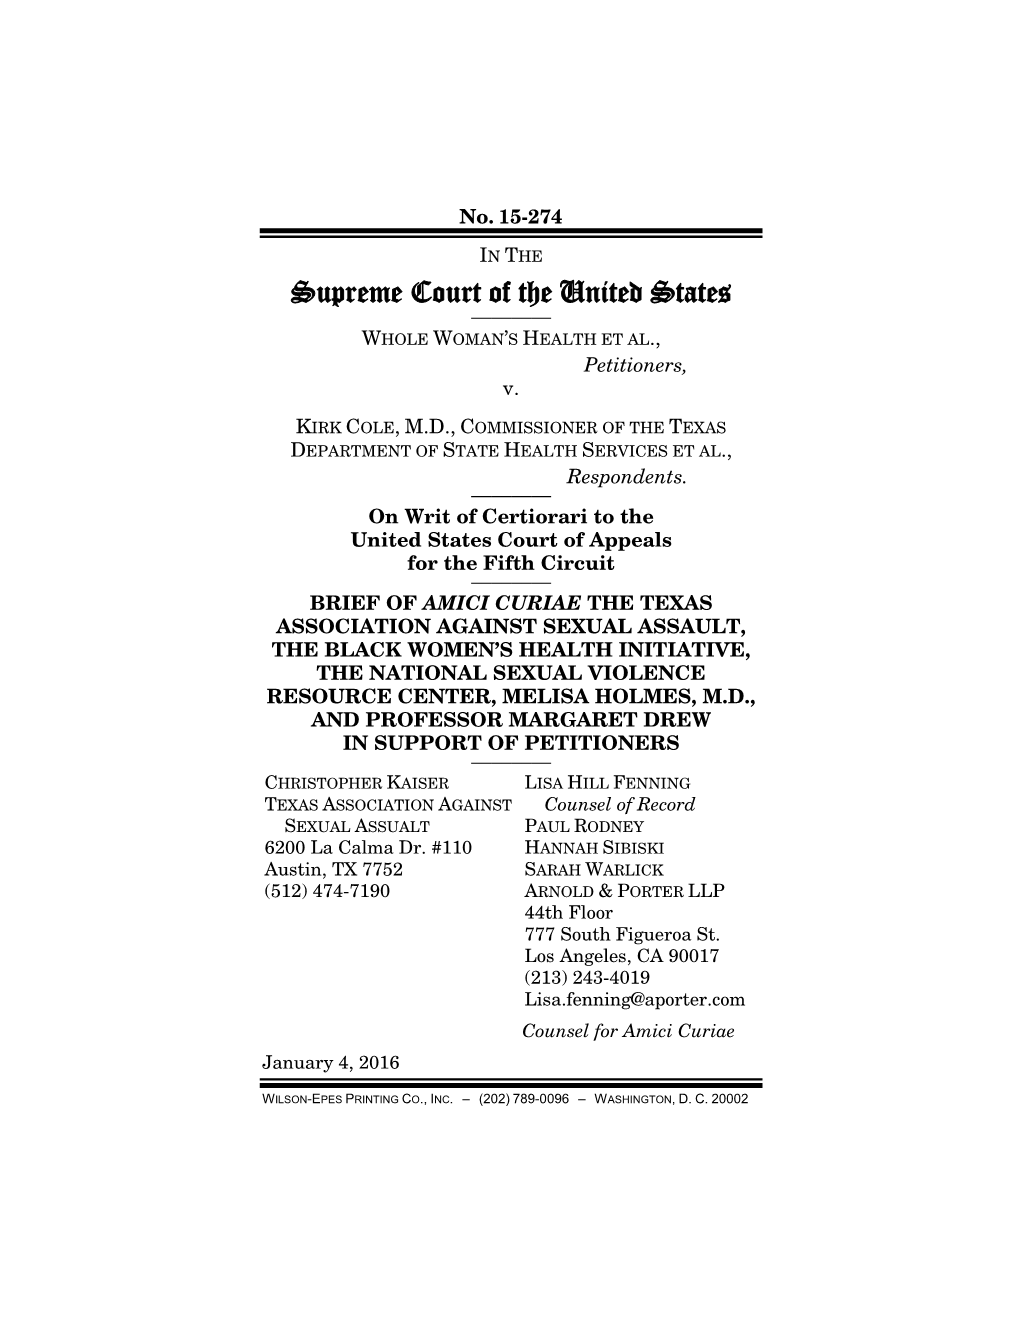 Wilson-Epes Standardized Format for Legal Briefs